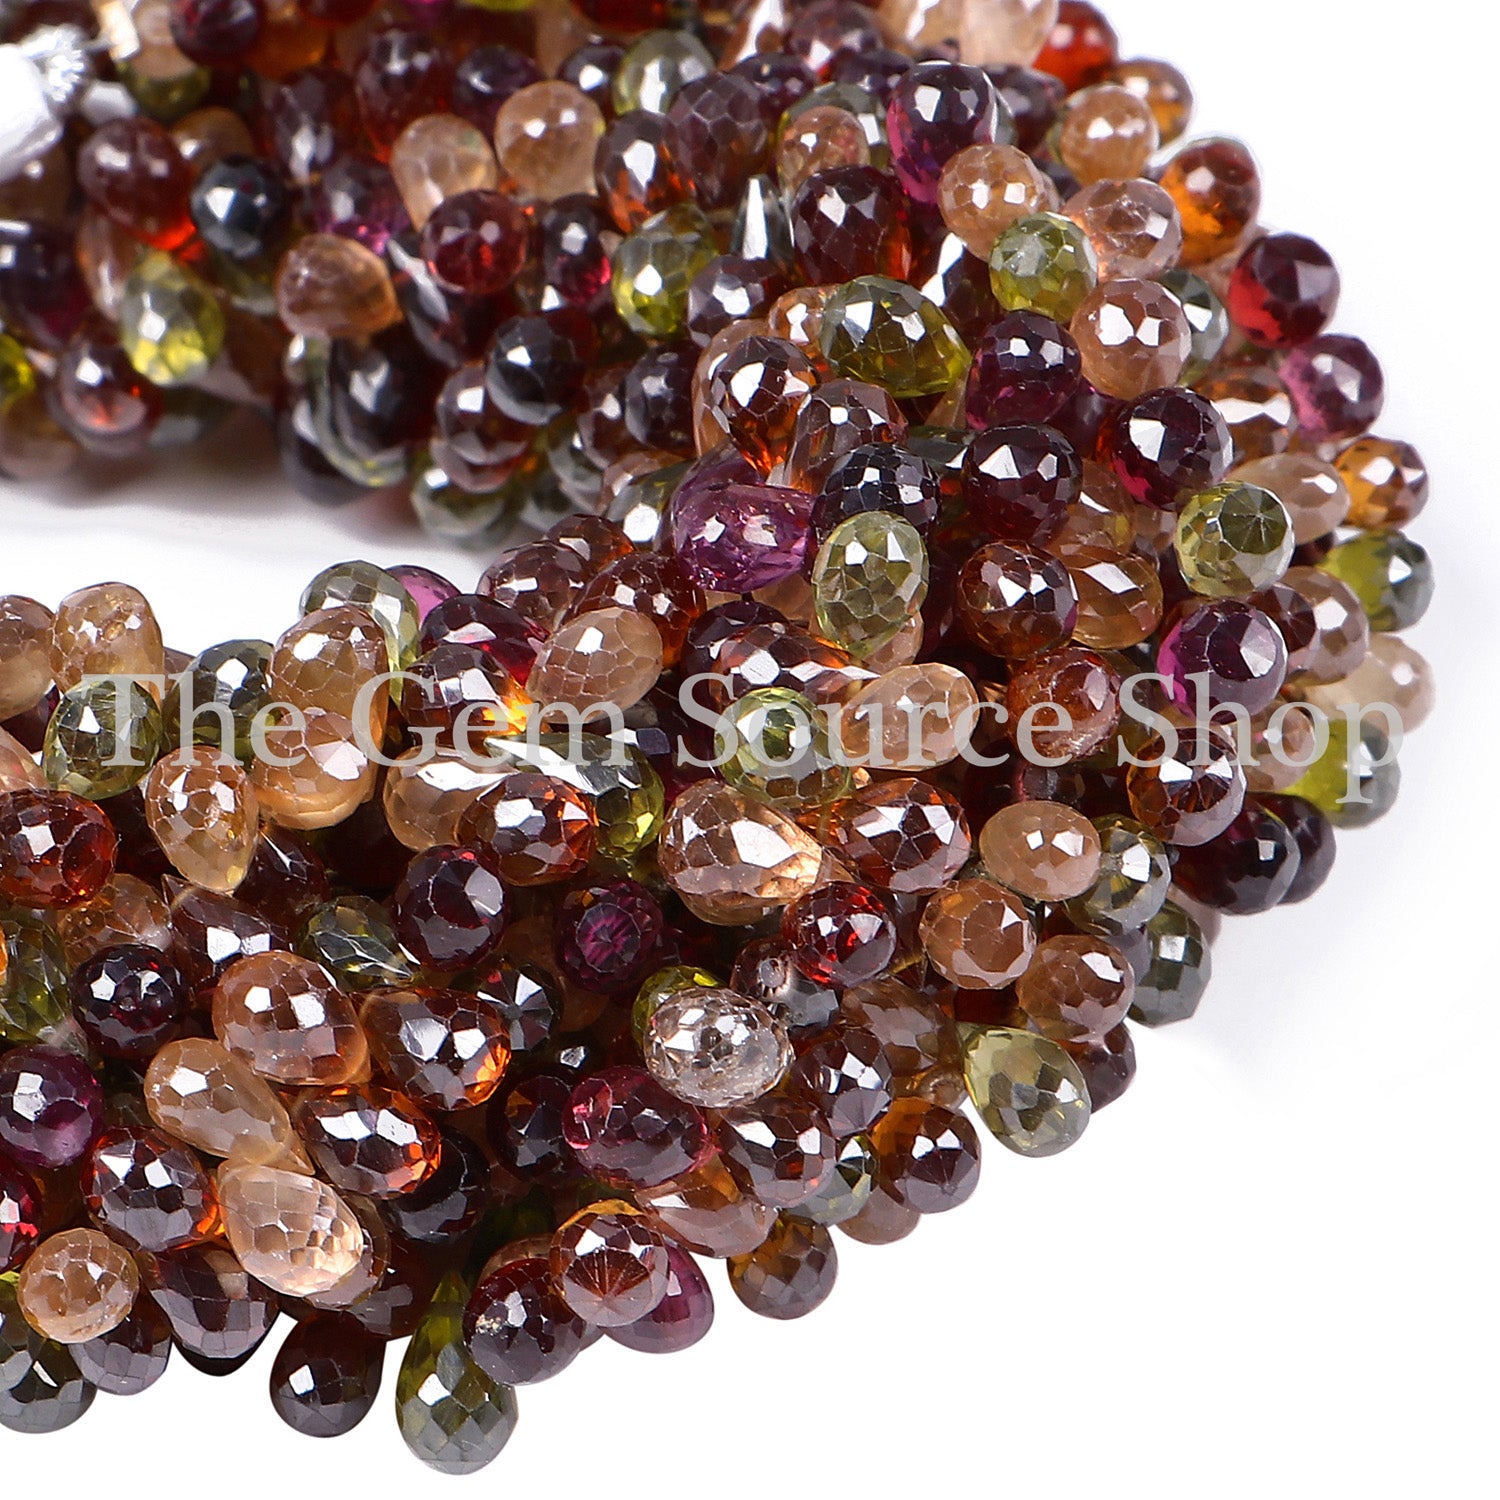 Tundra Sapphire Beads, Tundra Sapphire Faceted Beads, Tundra Sapphire Drop Shape Beads